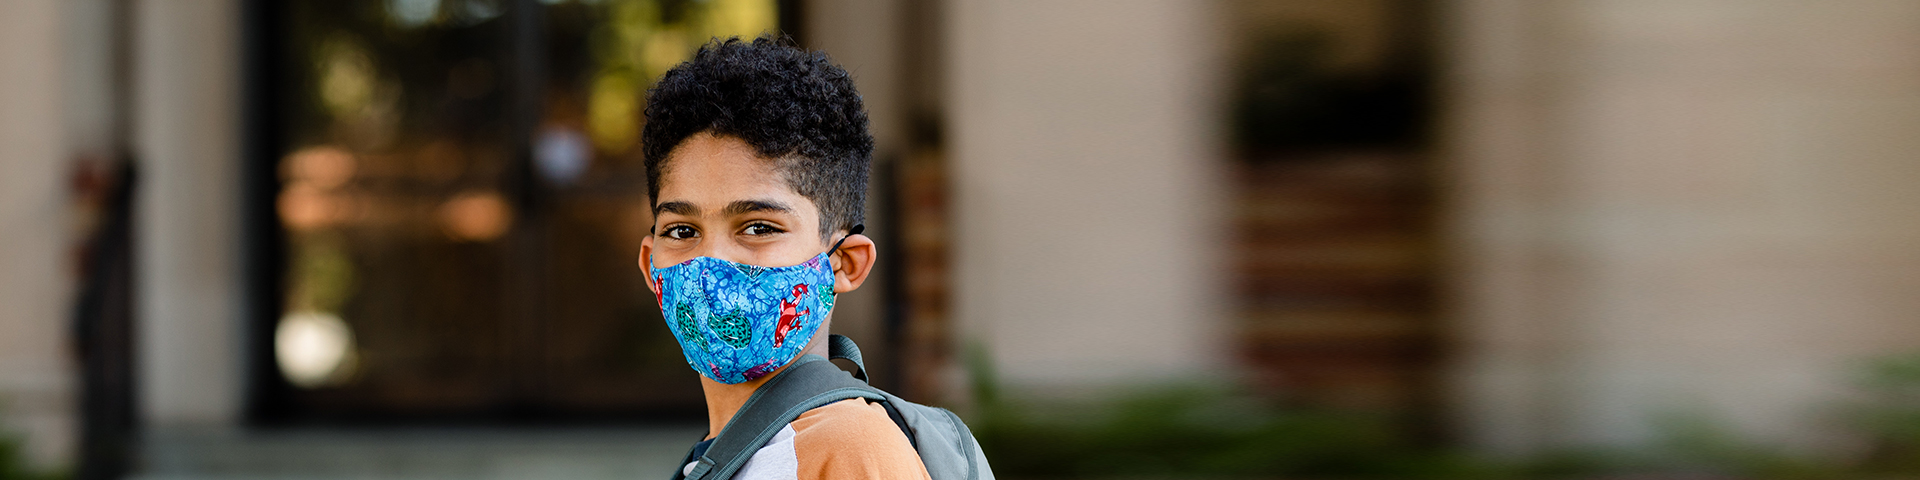 Health Magazine Fall 2021 banner image: a child wearing a face mask